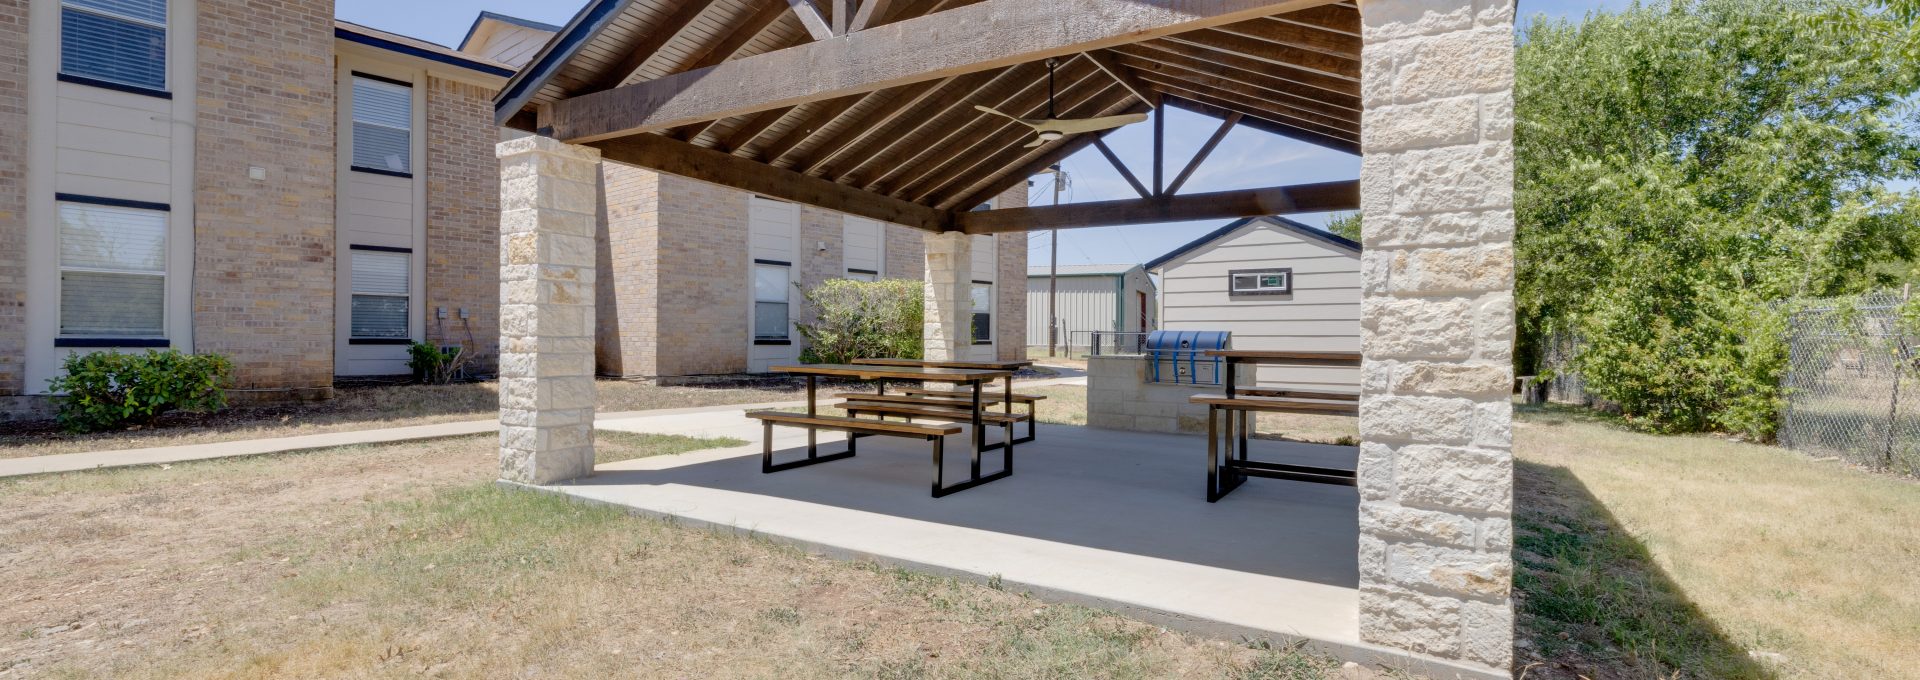 the picnic area at The Blanco Oaks Apartments